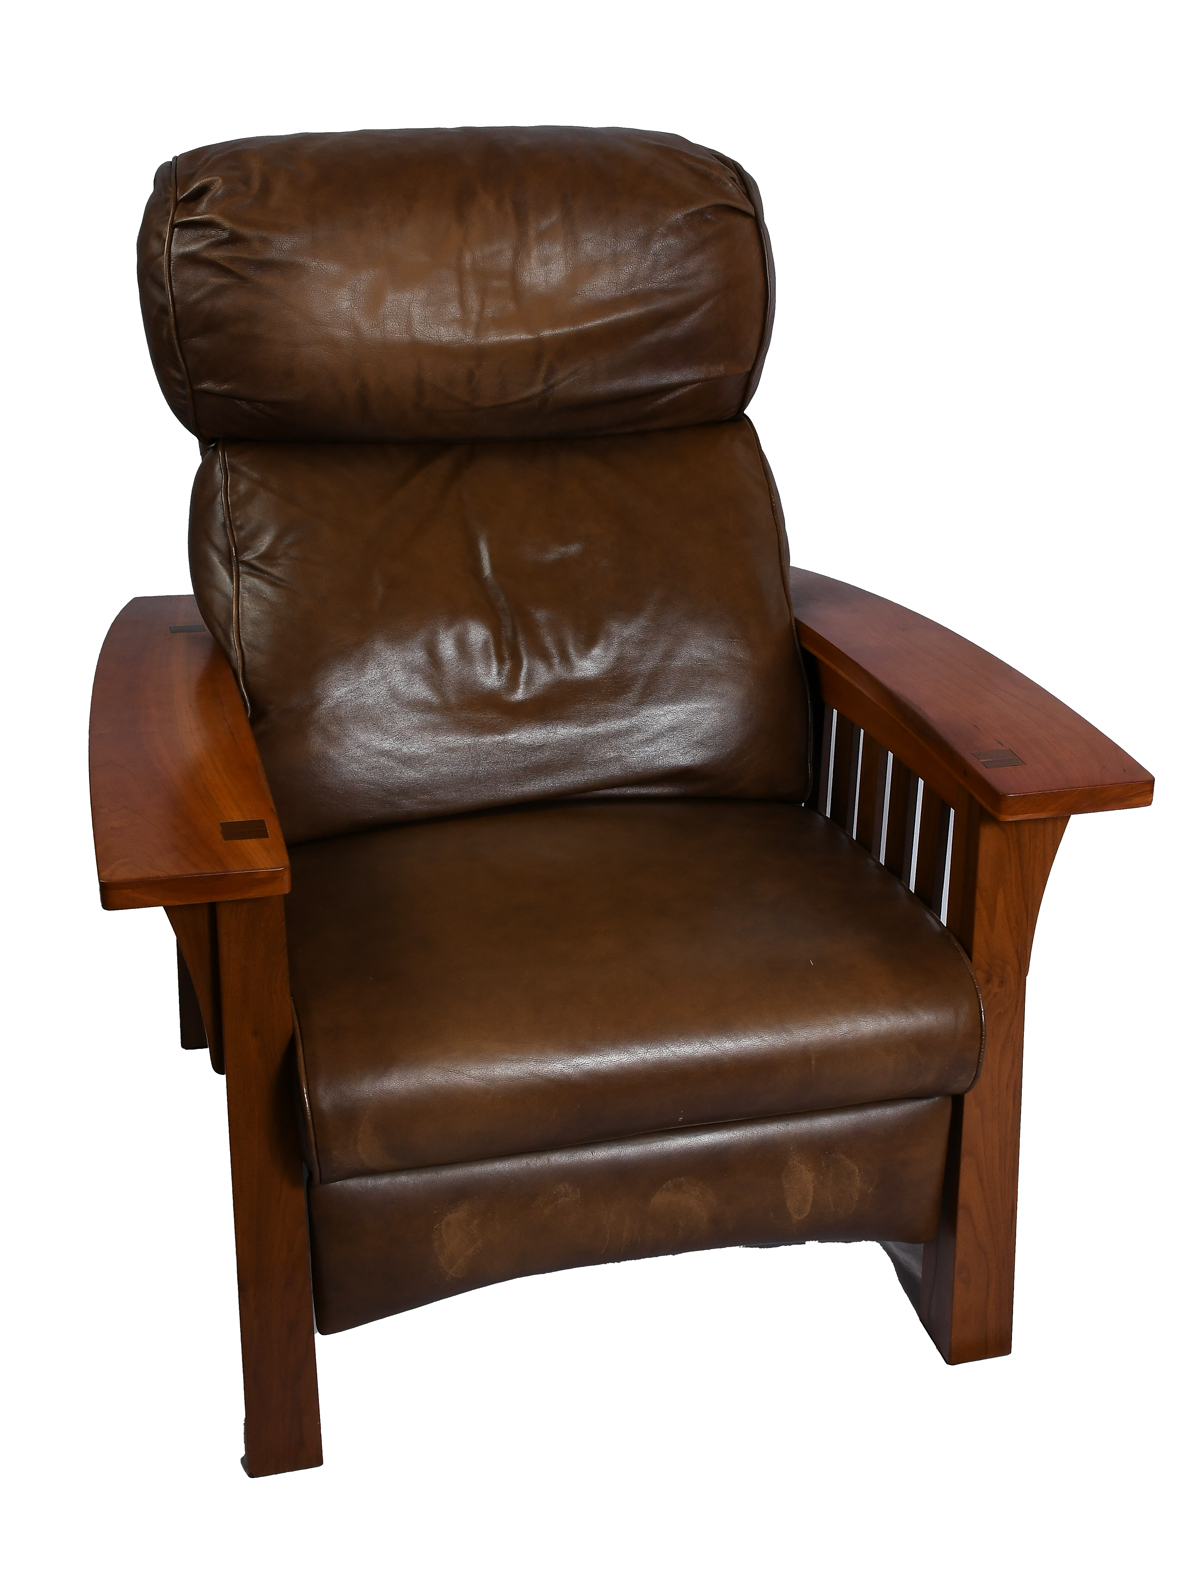 STICKLEY ARTS & CRAFTS STYLE BOW ARMCHAIR: